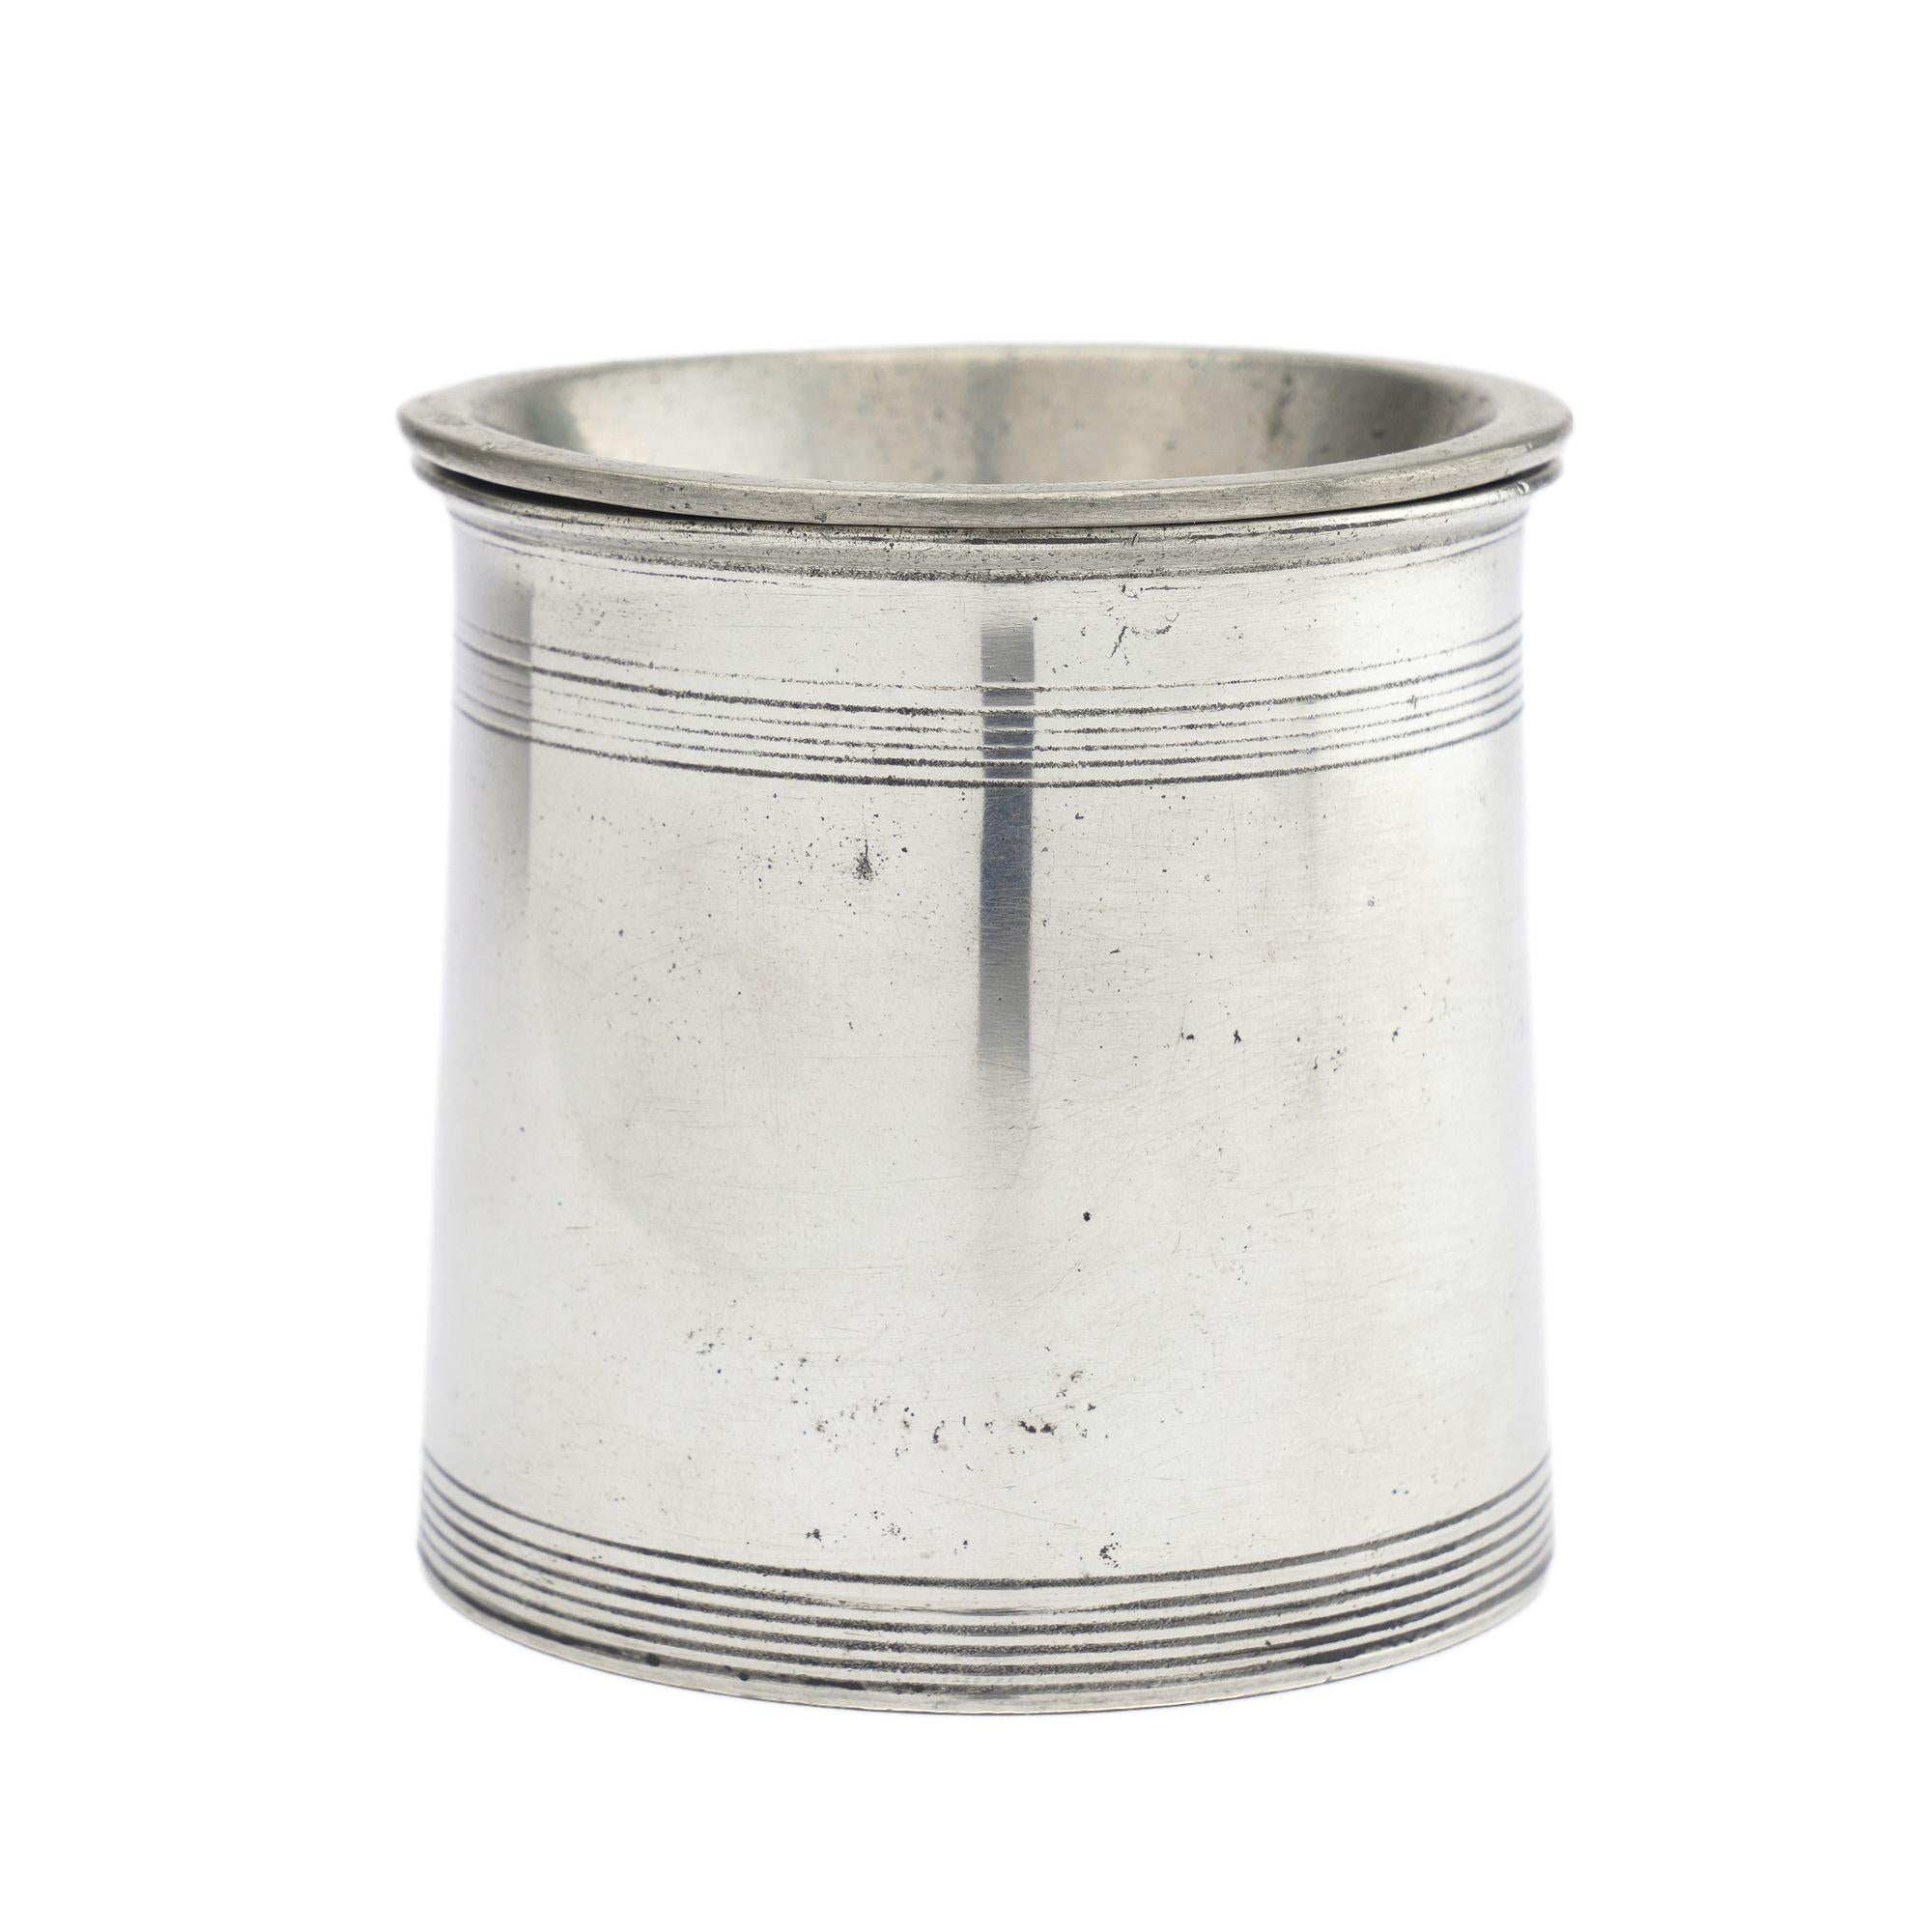 English William IV polished pewter open canister with engine turned scoring on the top and bottom rims. Unmarked. The condition is polished with wear to the base consistent with age & use. 
England, early 19th century.